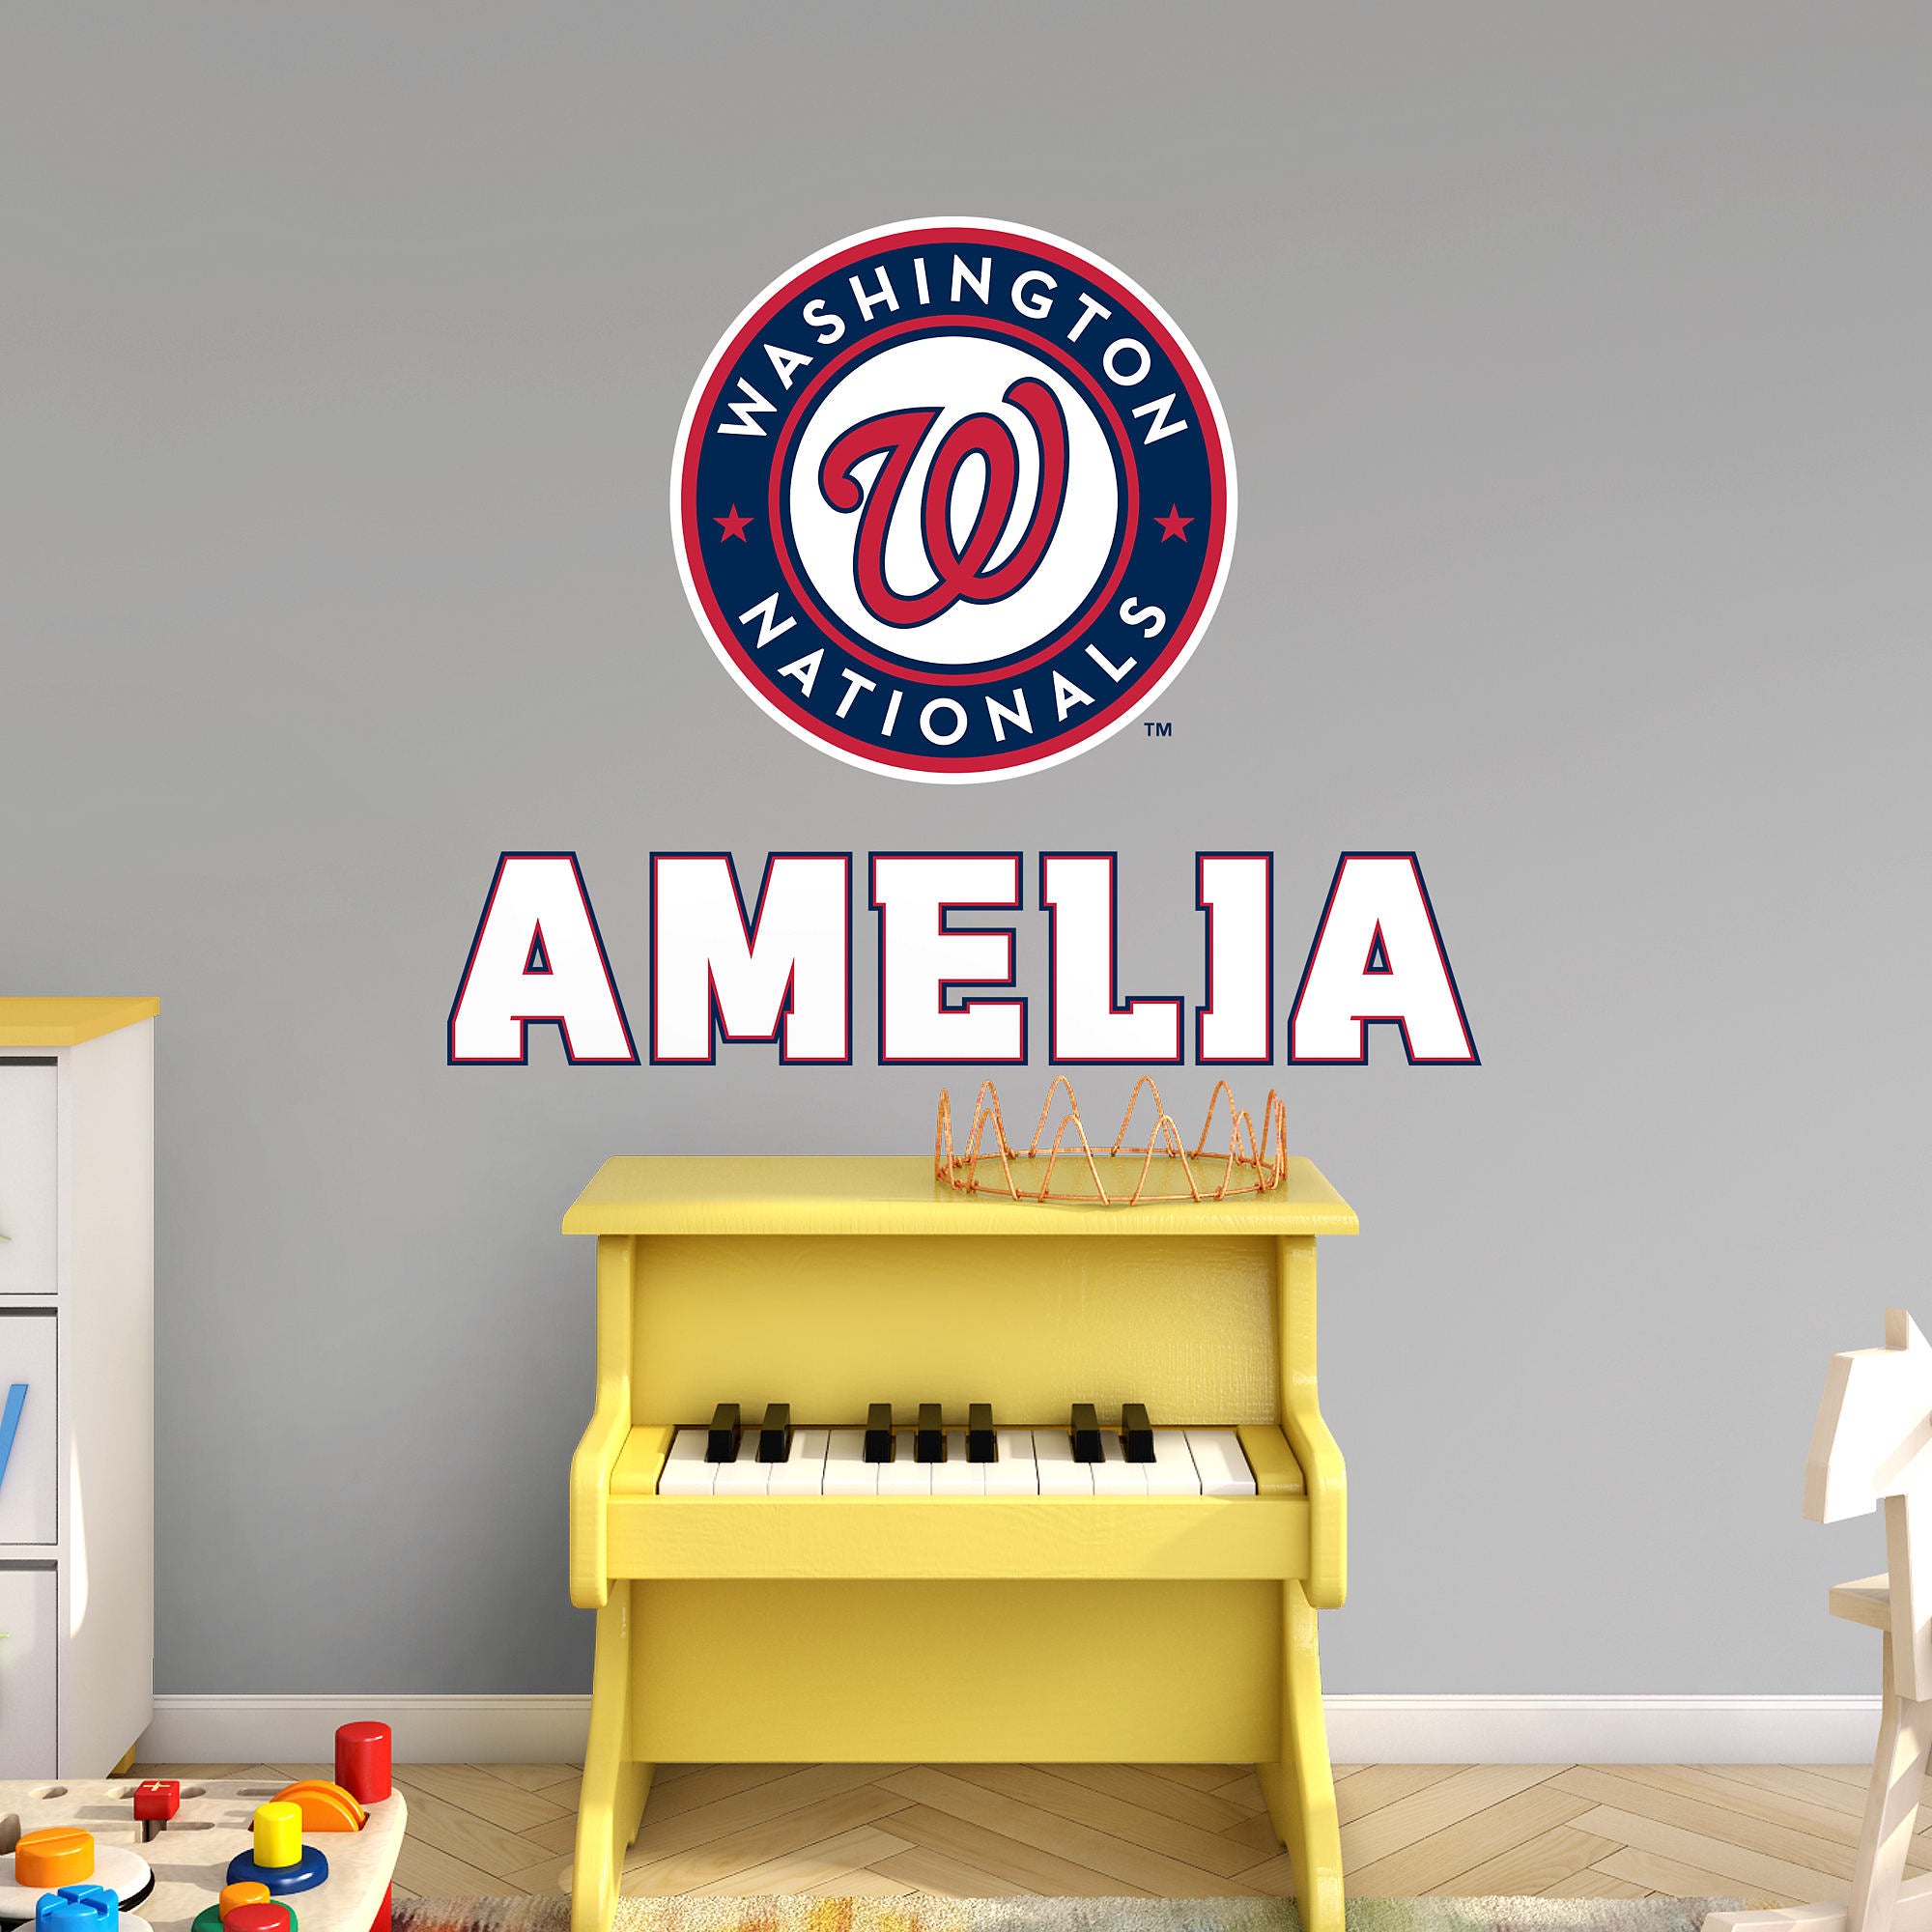 Washington Nationals: Stacked Personalized Name - Officially Licensed MLB Transfer Decal in White (52"W x 39.5"H) by Fathead | V